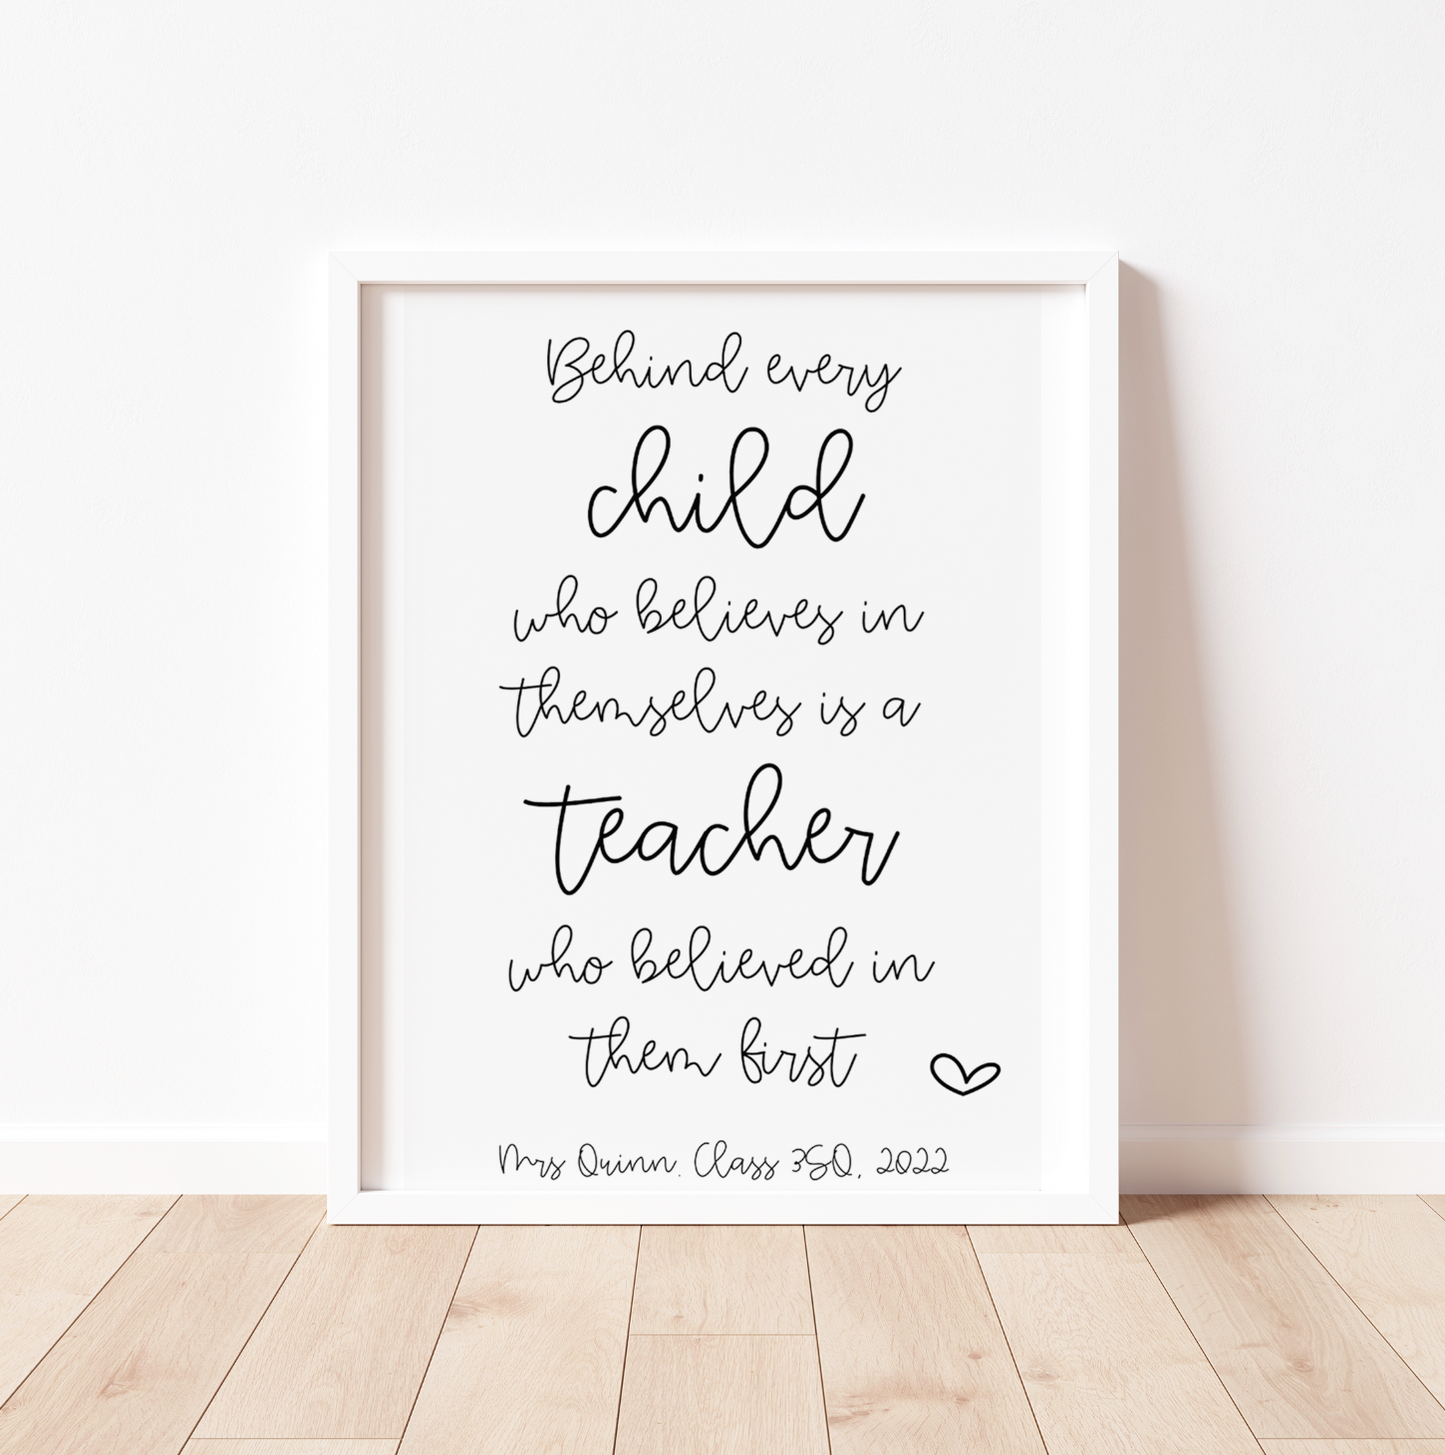 Behind Every Child who Believes in Themselves, is a Teacher who believed in them First Print